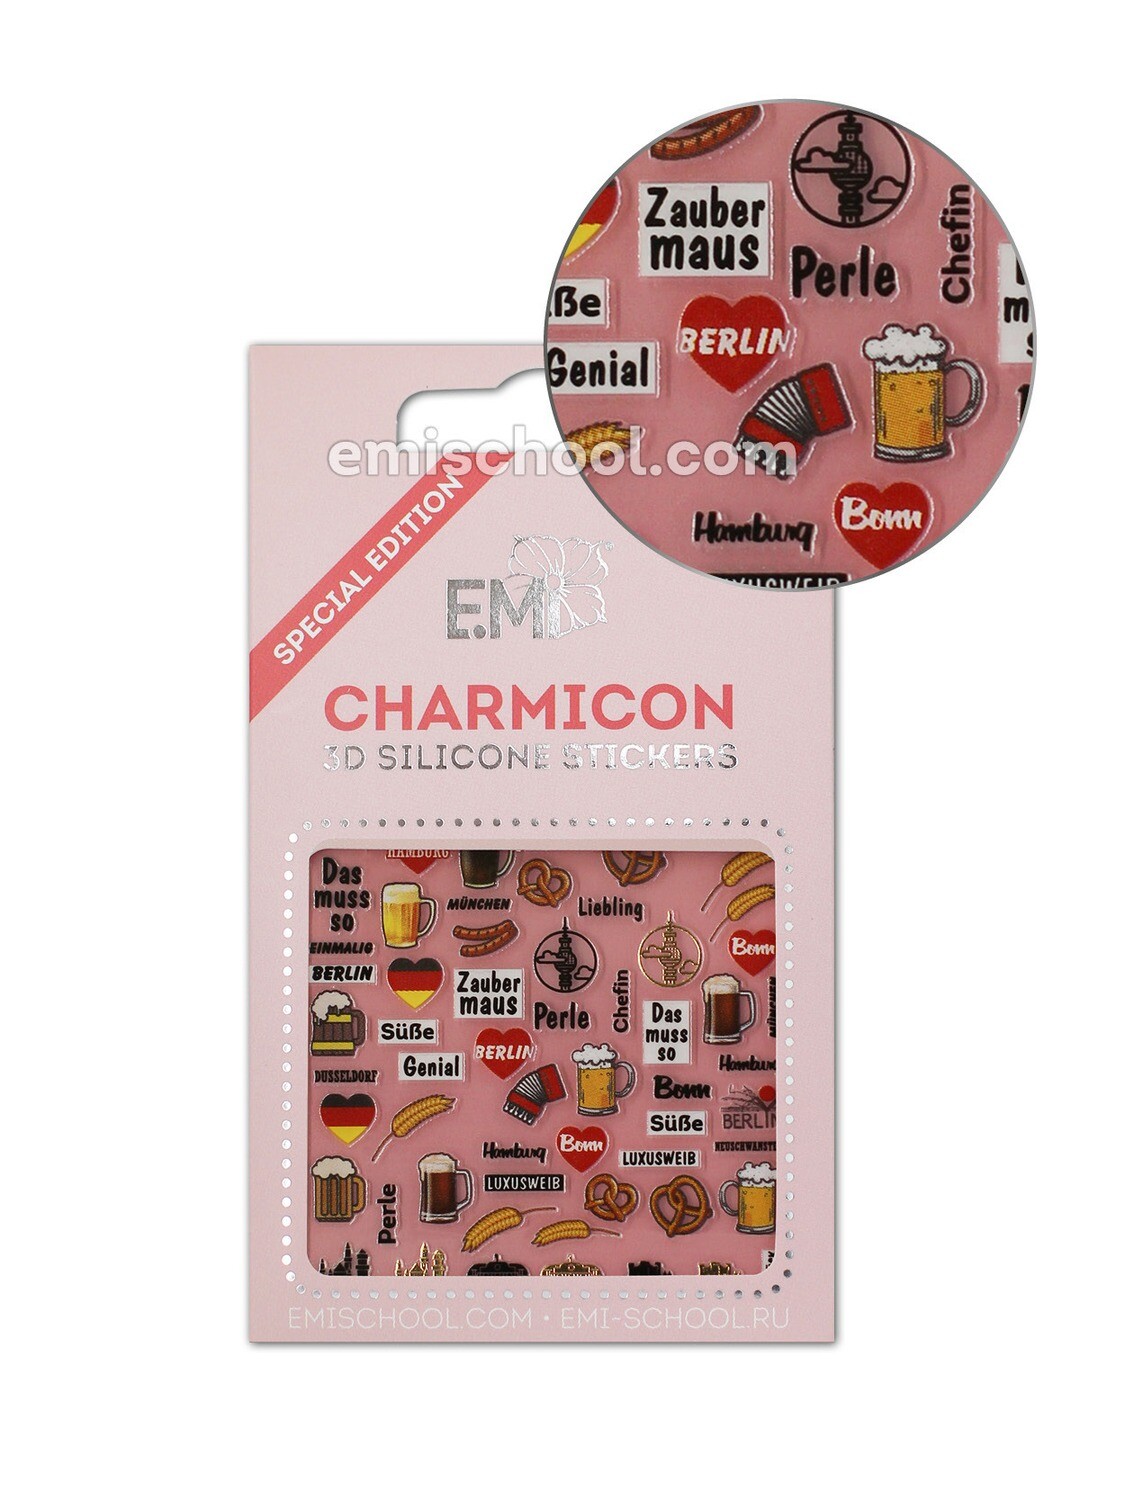 Charmicon 3D Silicone Stickers Germany 1